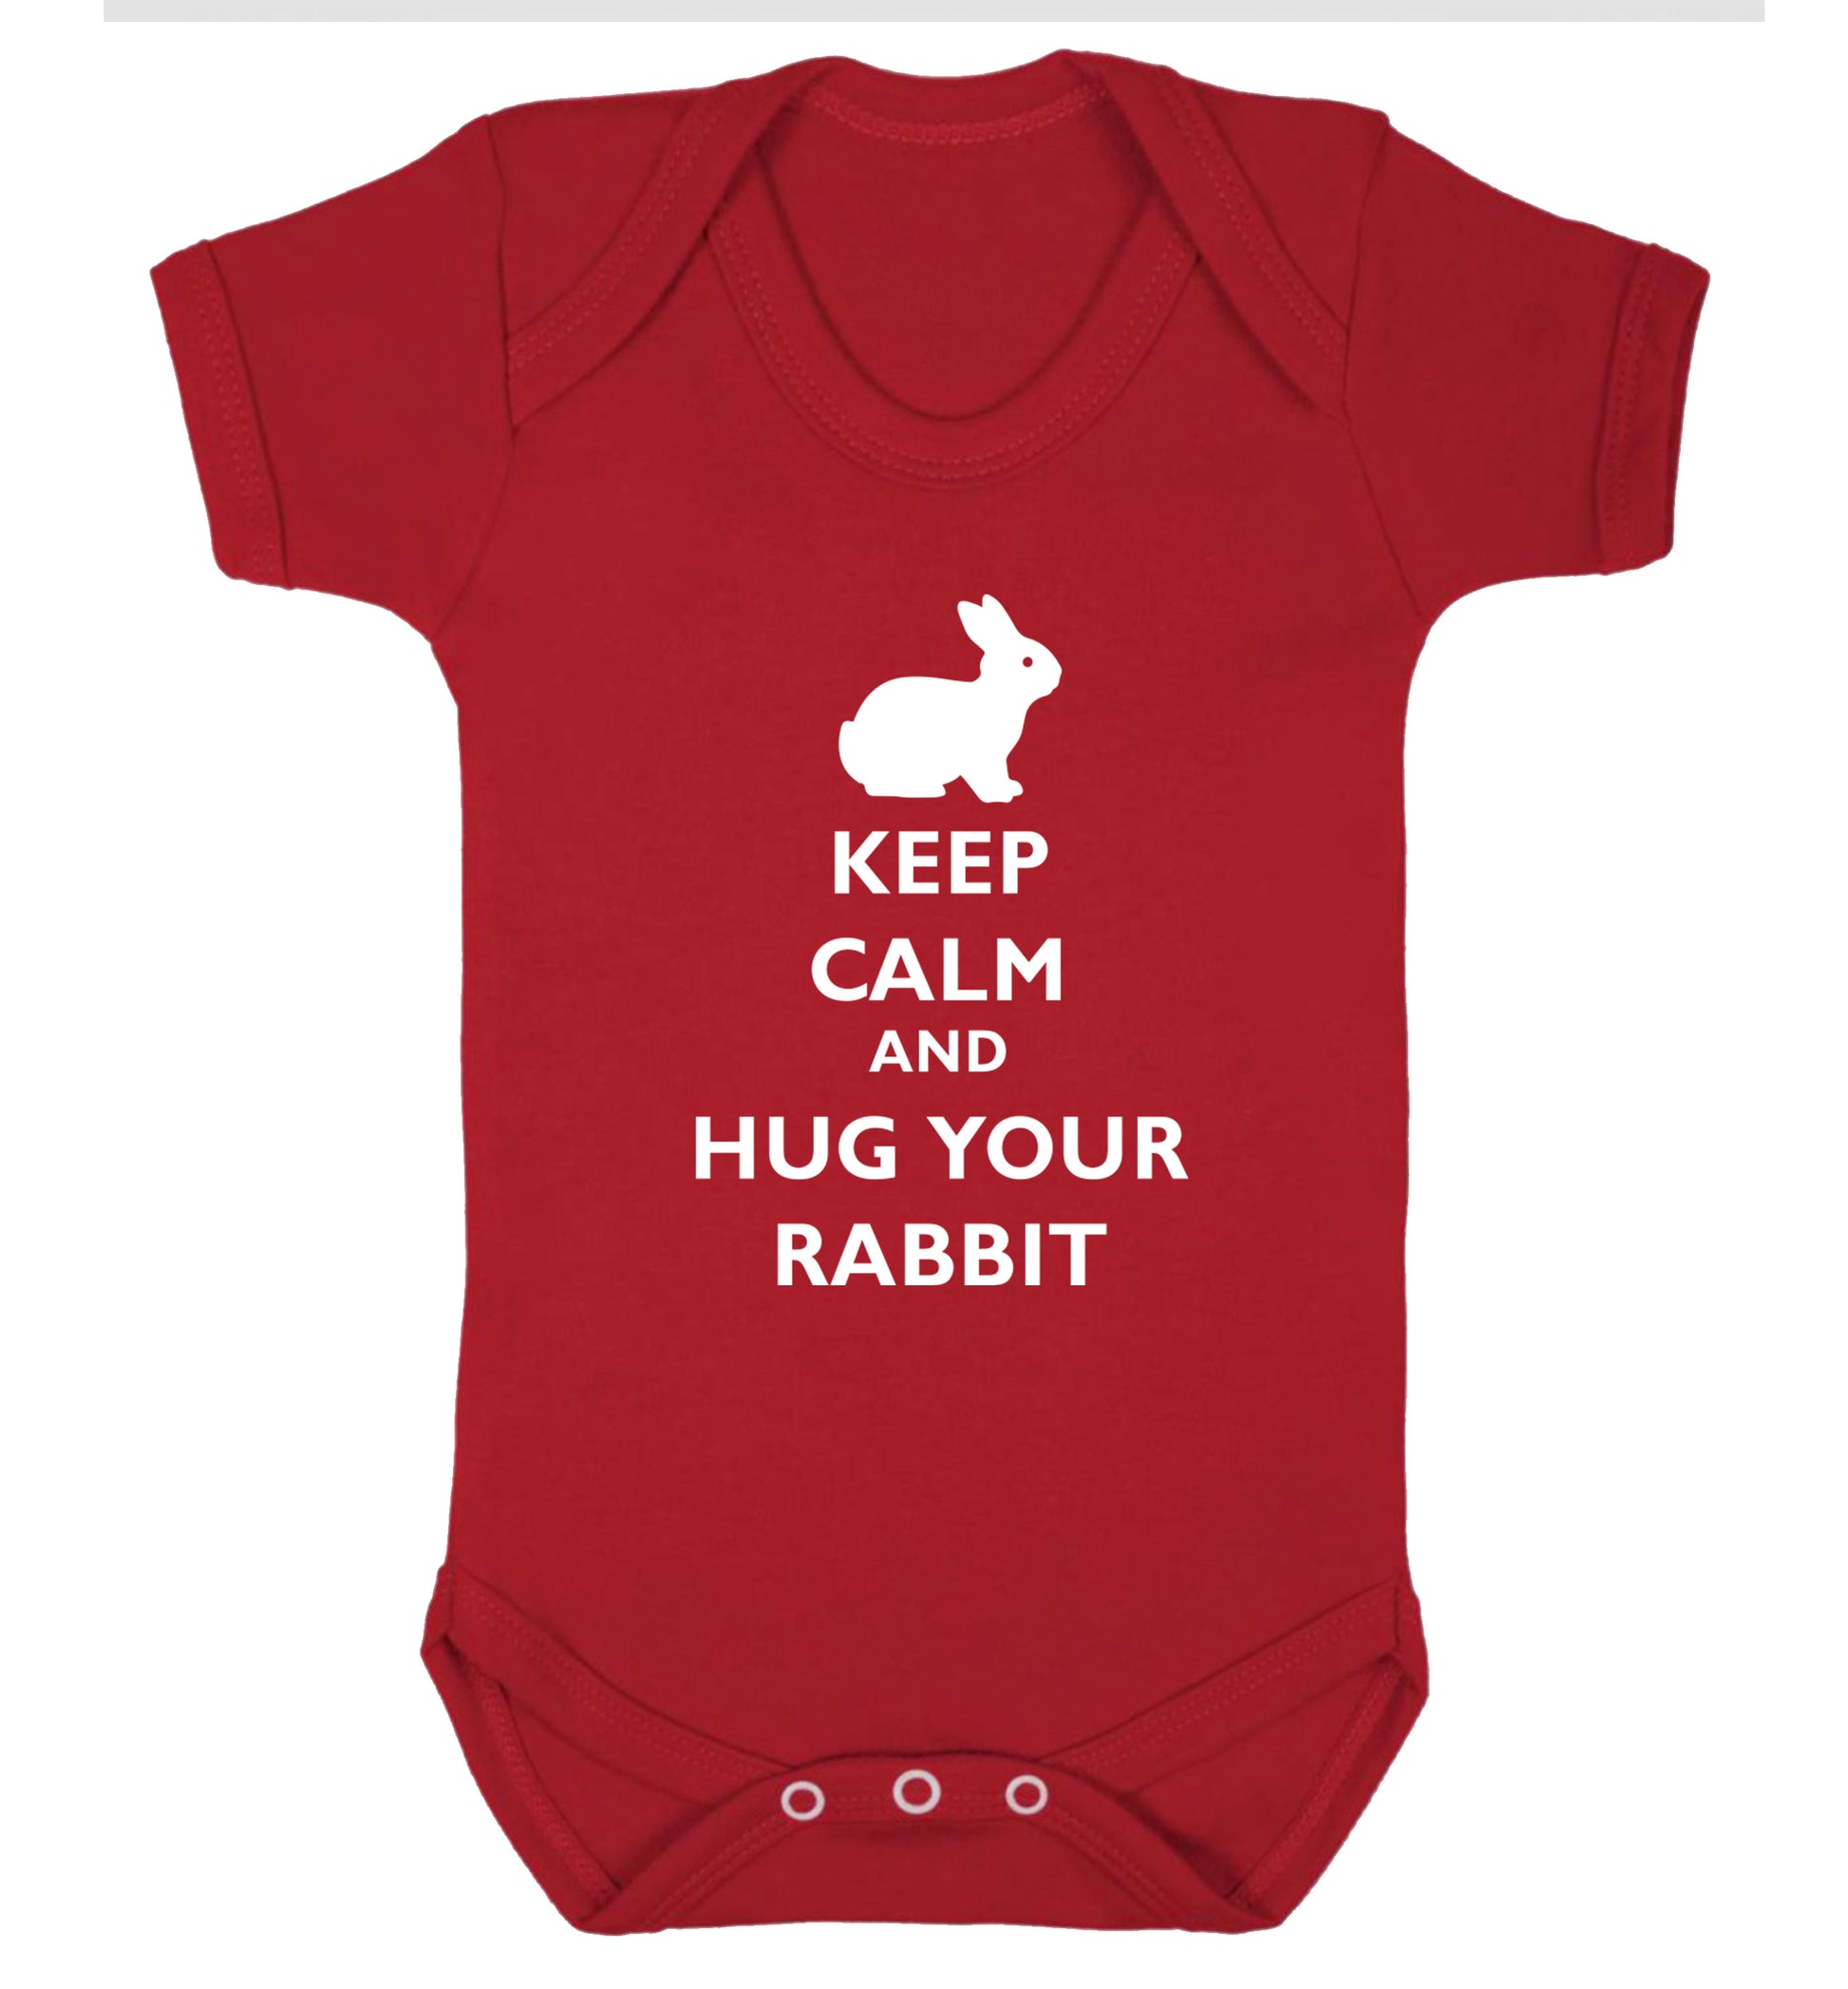 Keep calm and hug your rabbit Baby Vest red 18-24 months